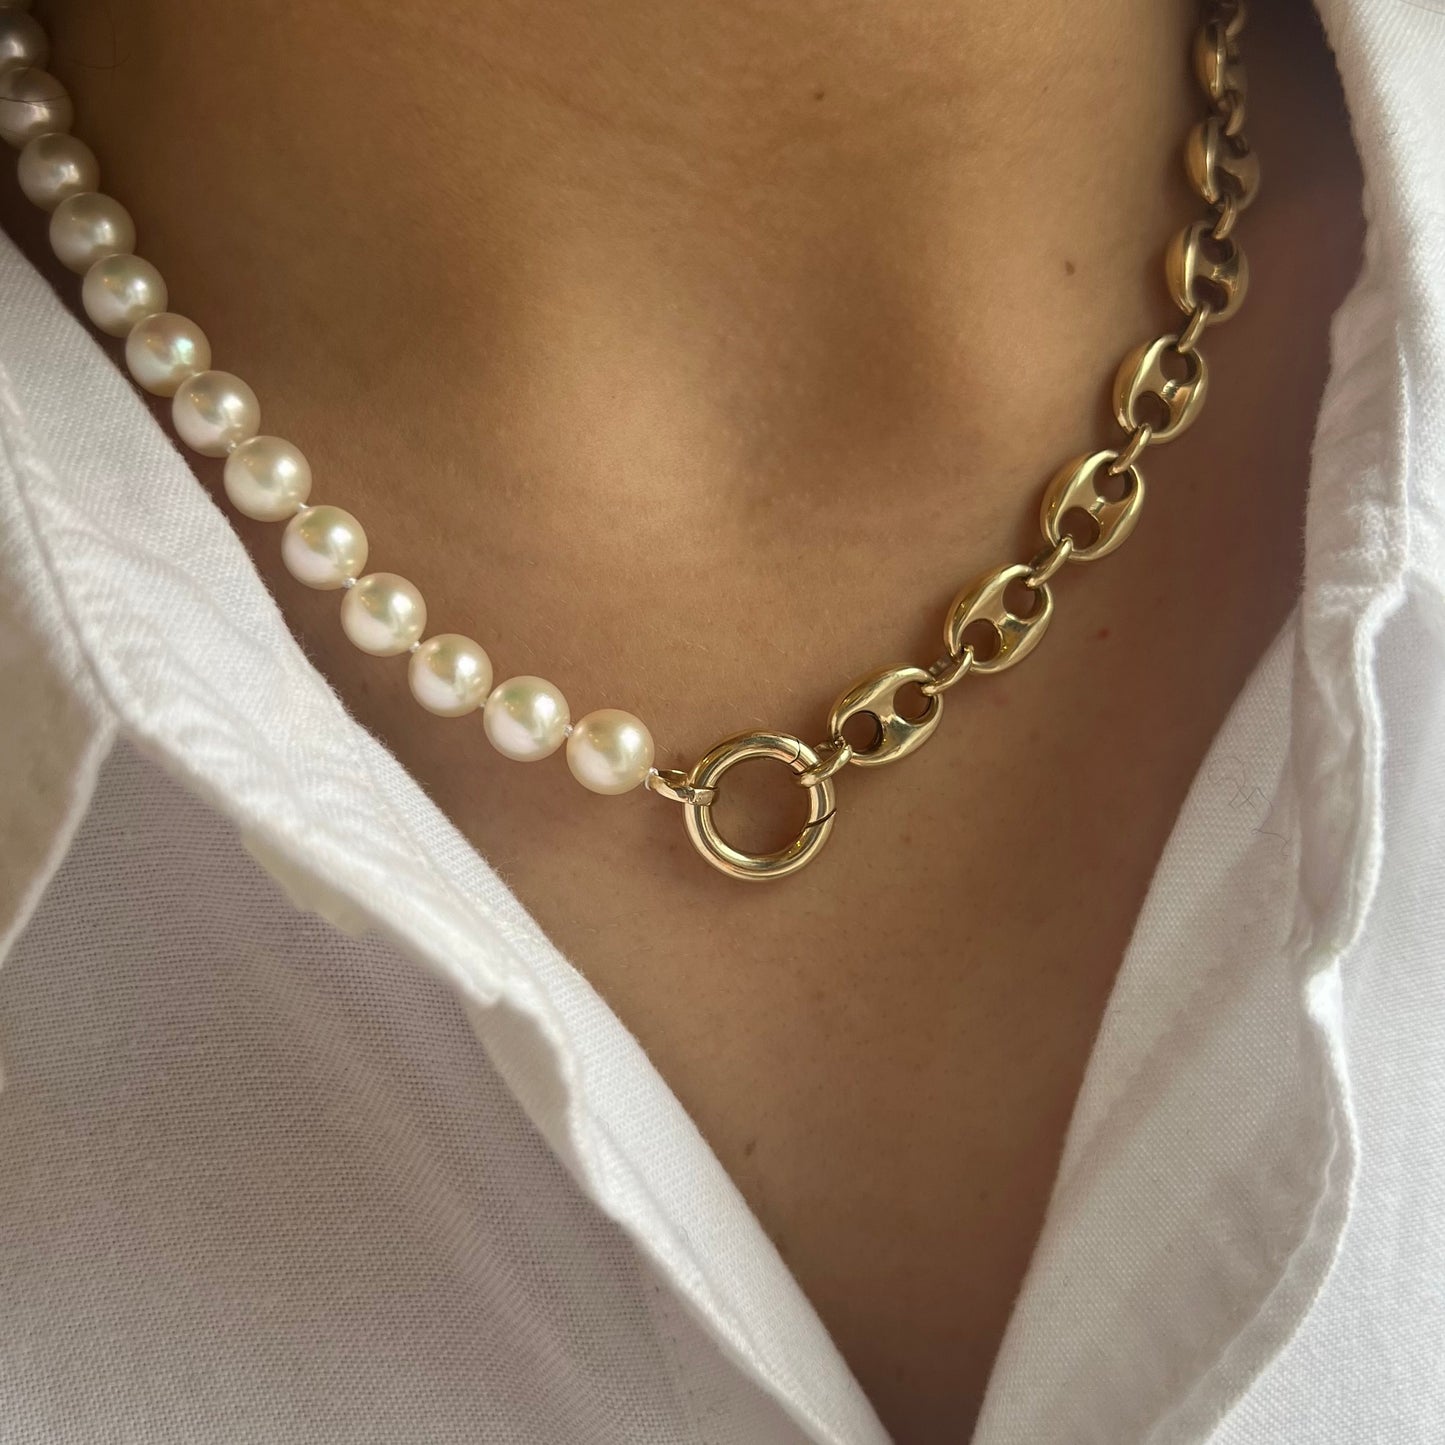 Half Pearl Half Puffed G Link Necklace with Charm Clasp